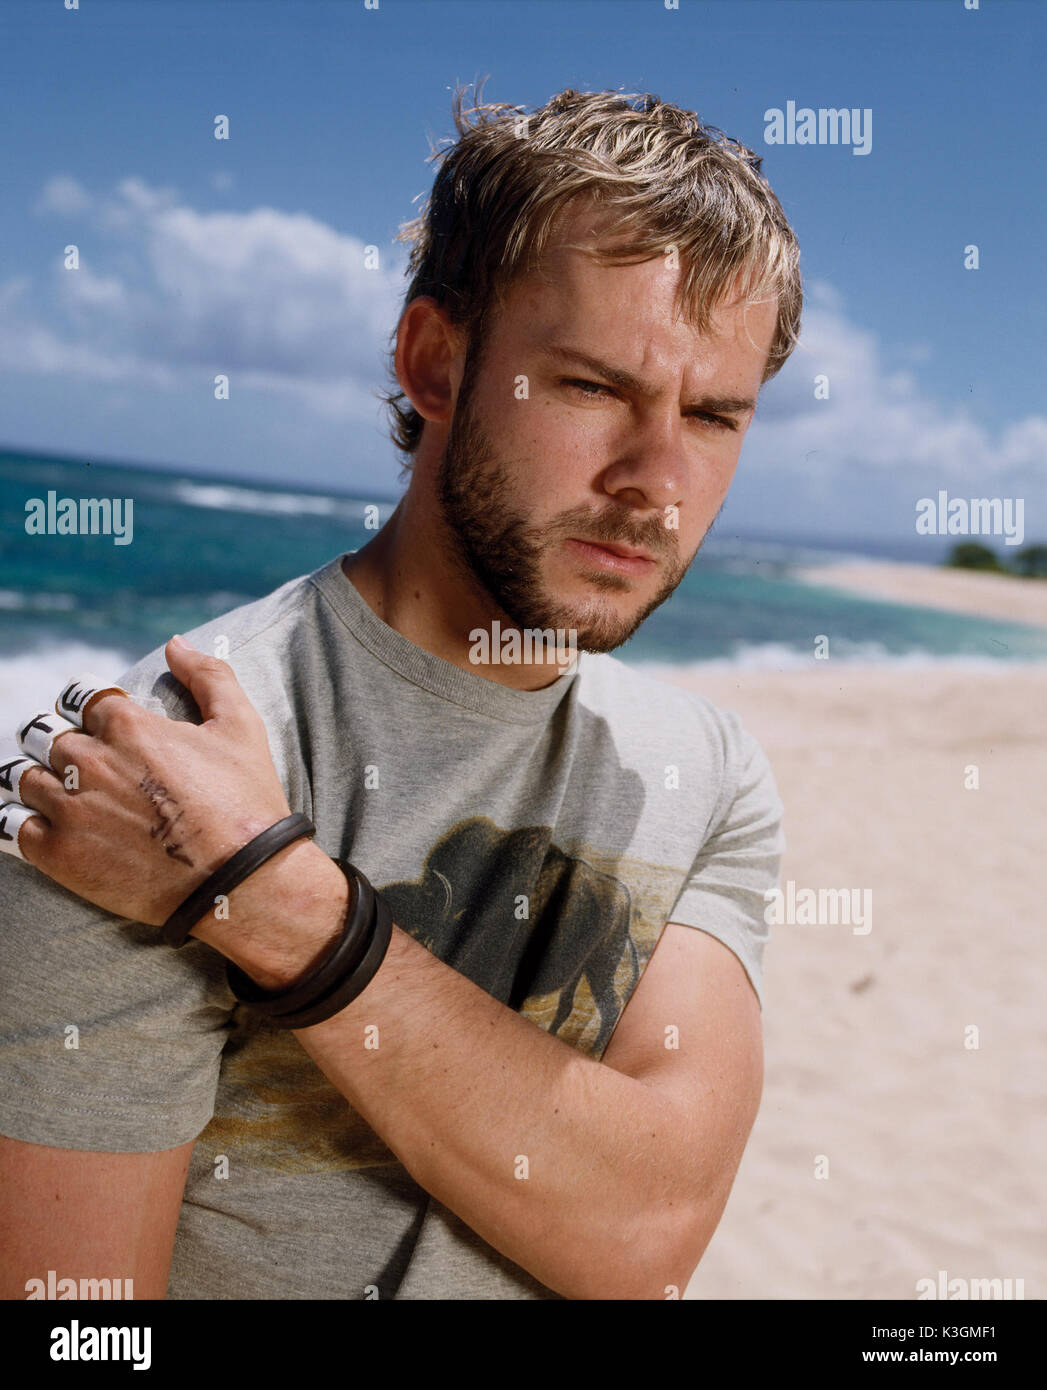 LOST Series #1 DOMINIC MONAGHAN as Charlie Stock Photo - Alamy